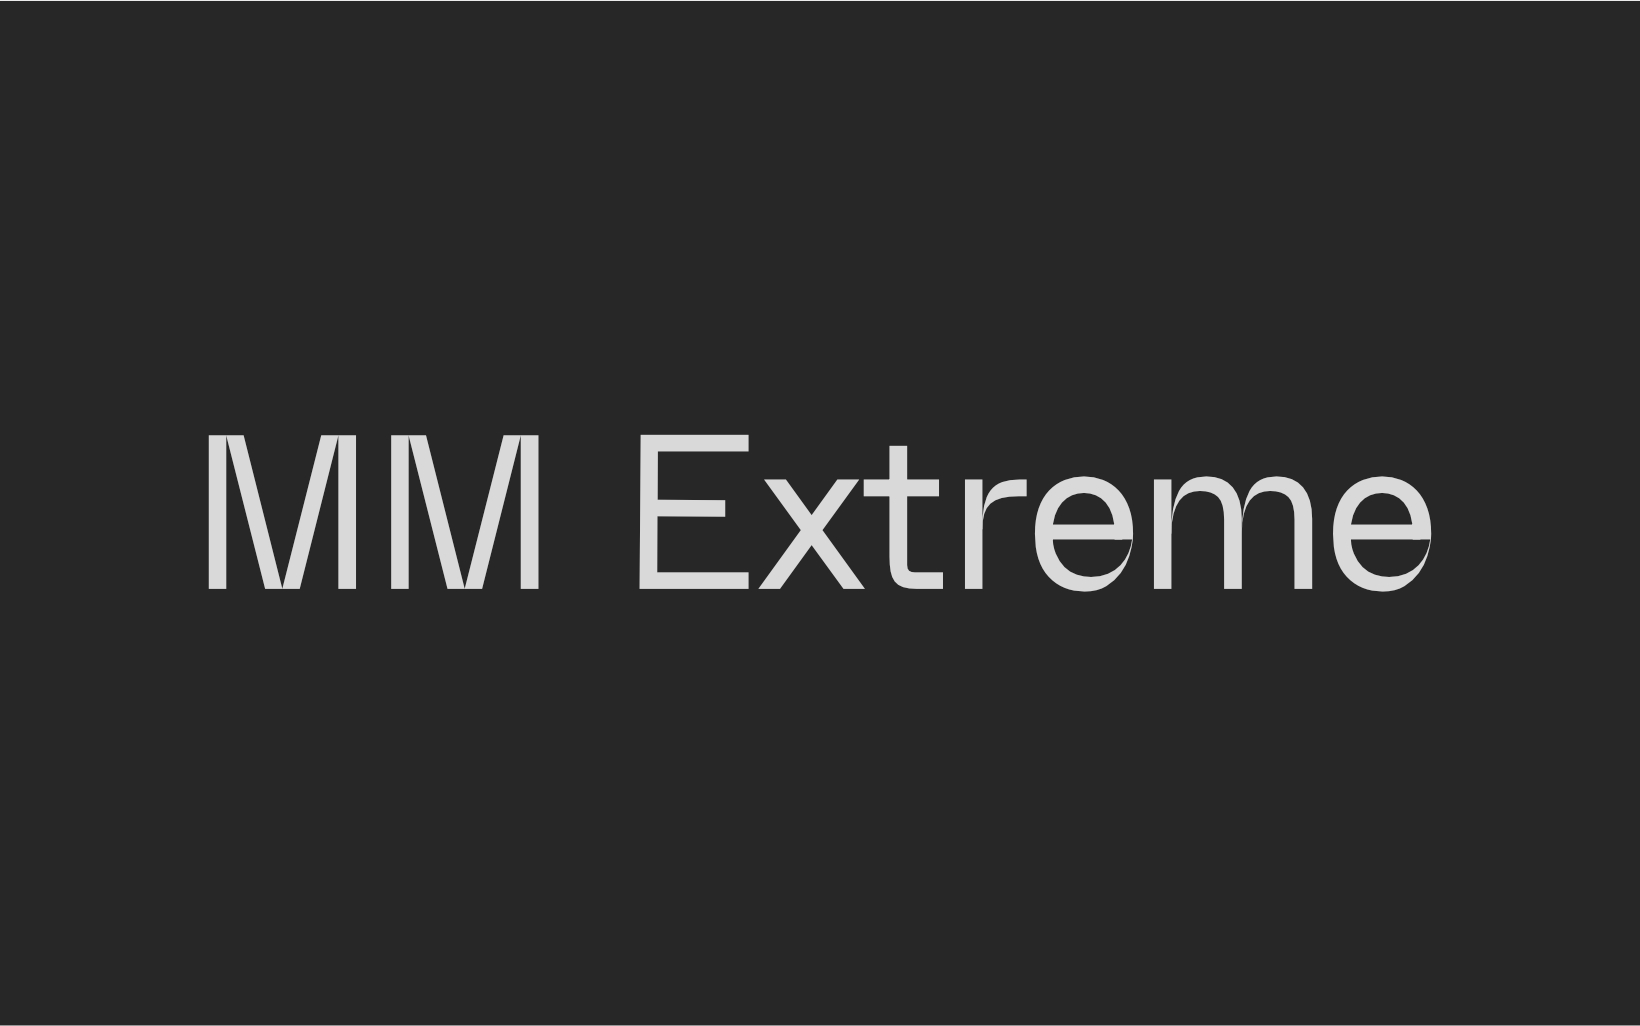 MM Extreme